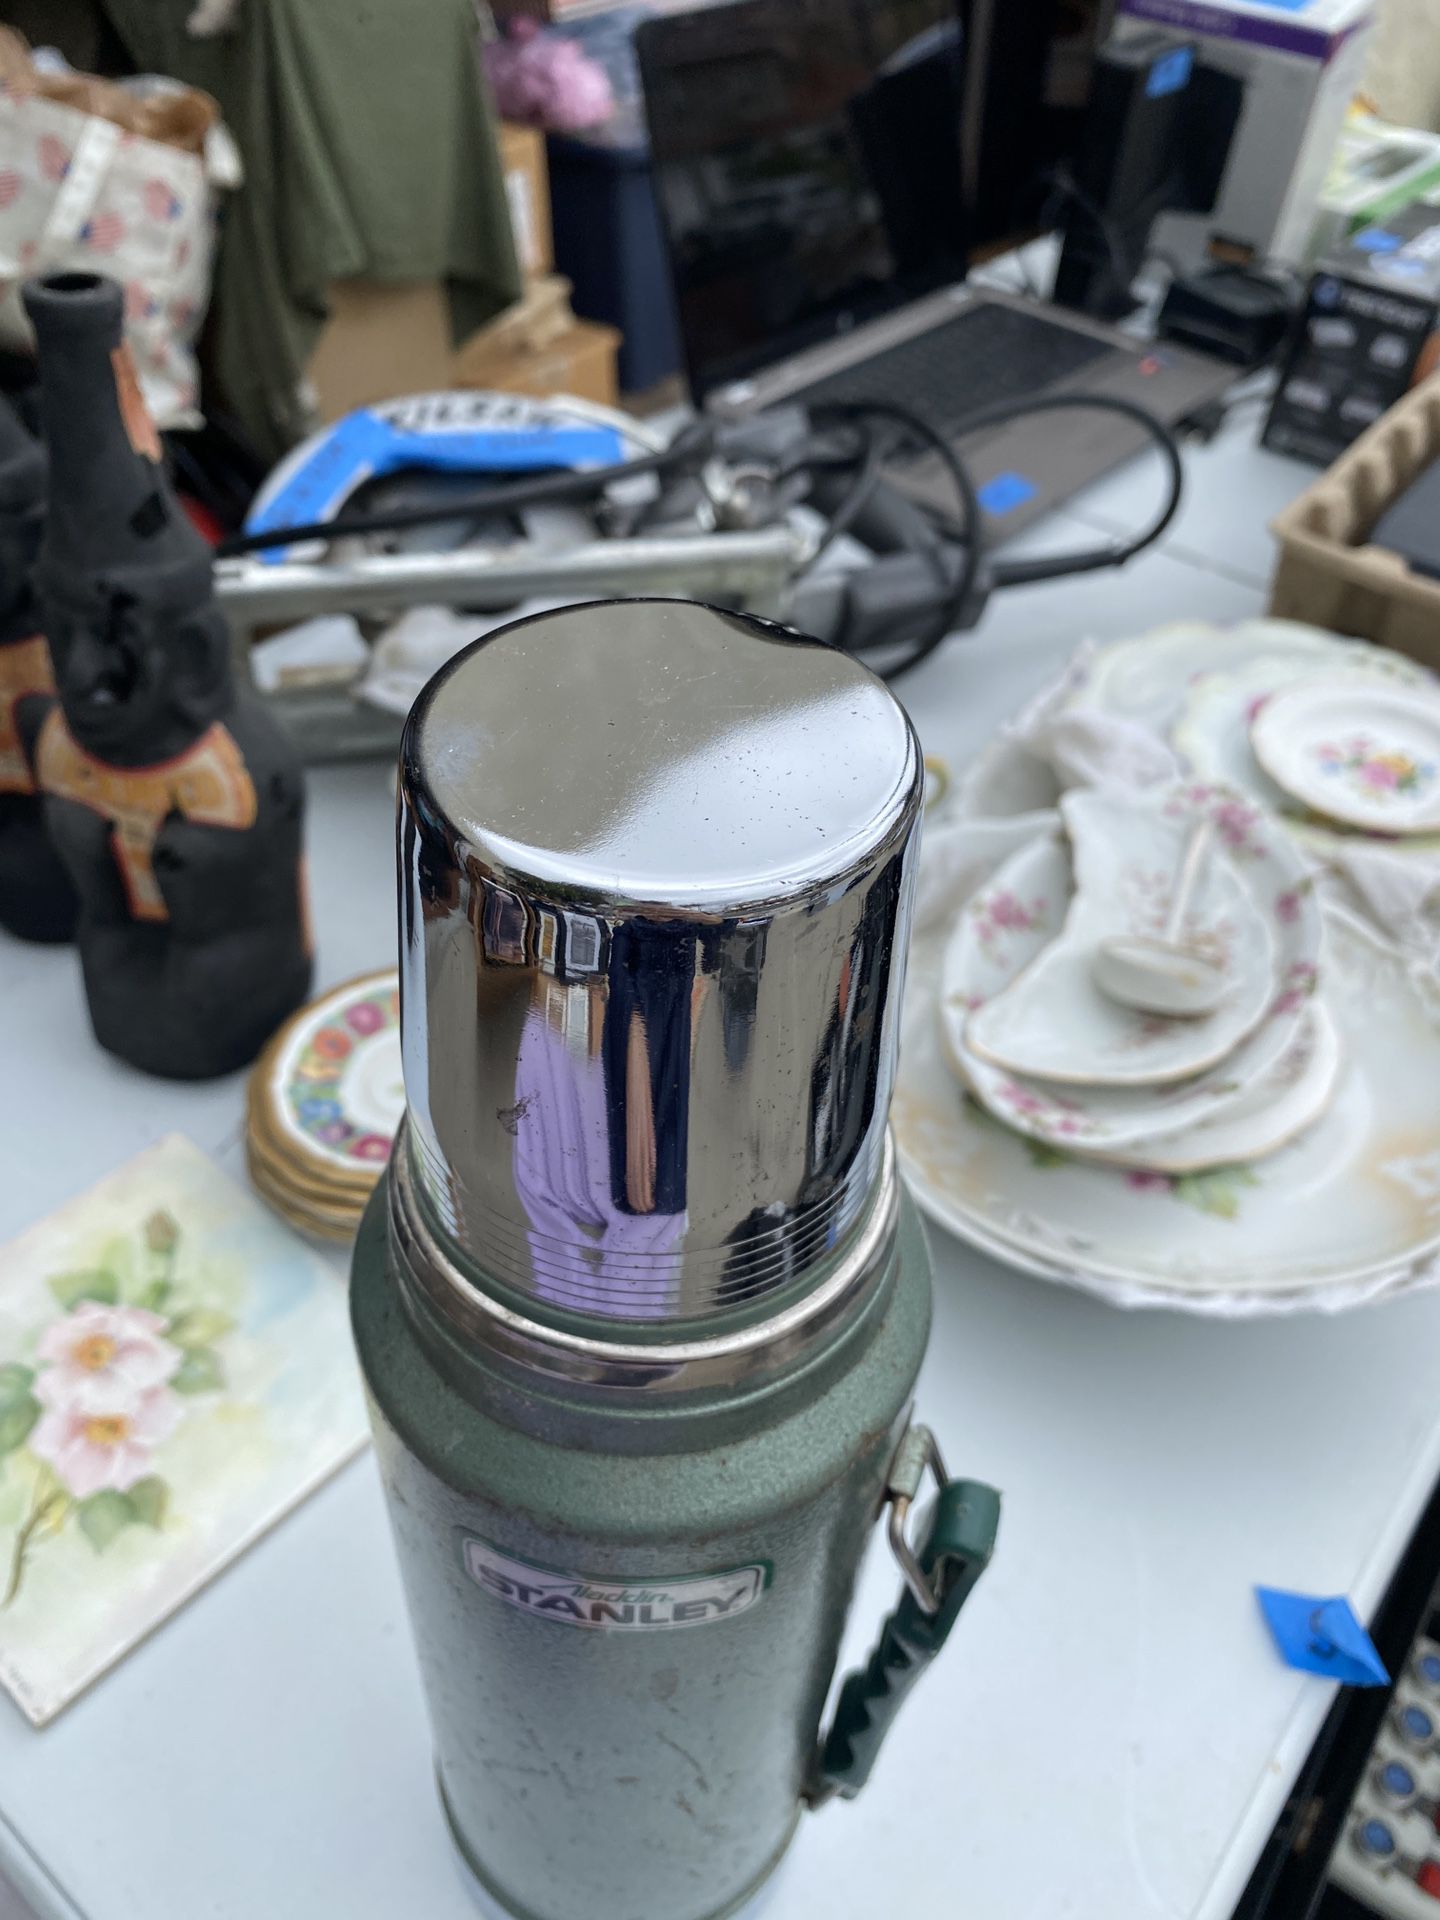 Stanley Coffee Thermos Coffee 2 Qt for Sale in Atwater, CA - OfferUp